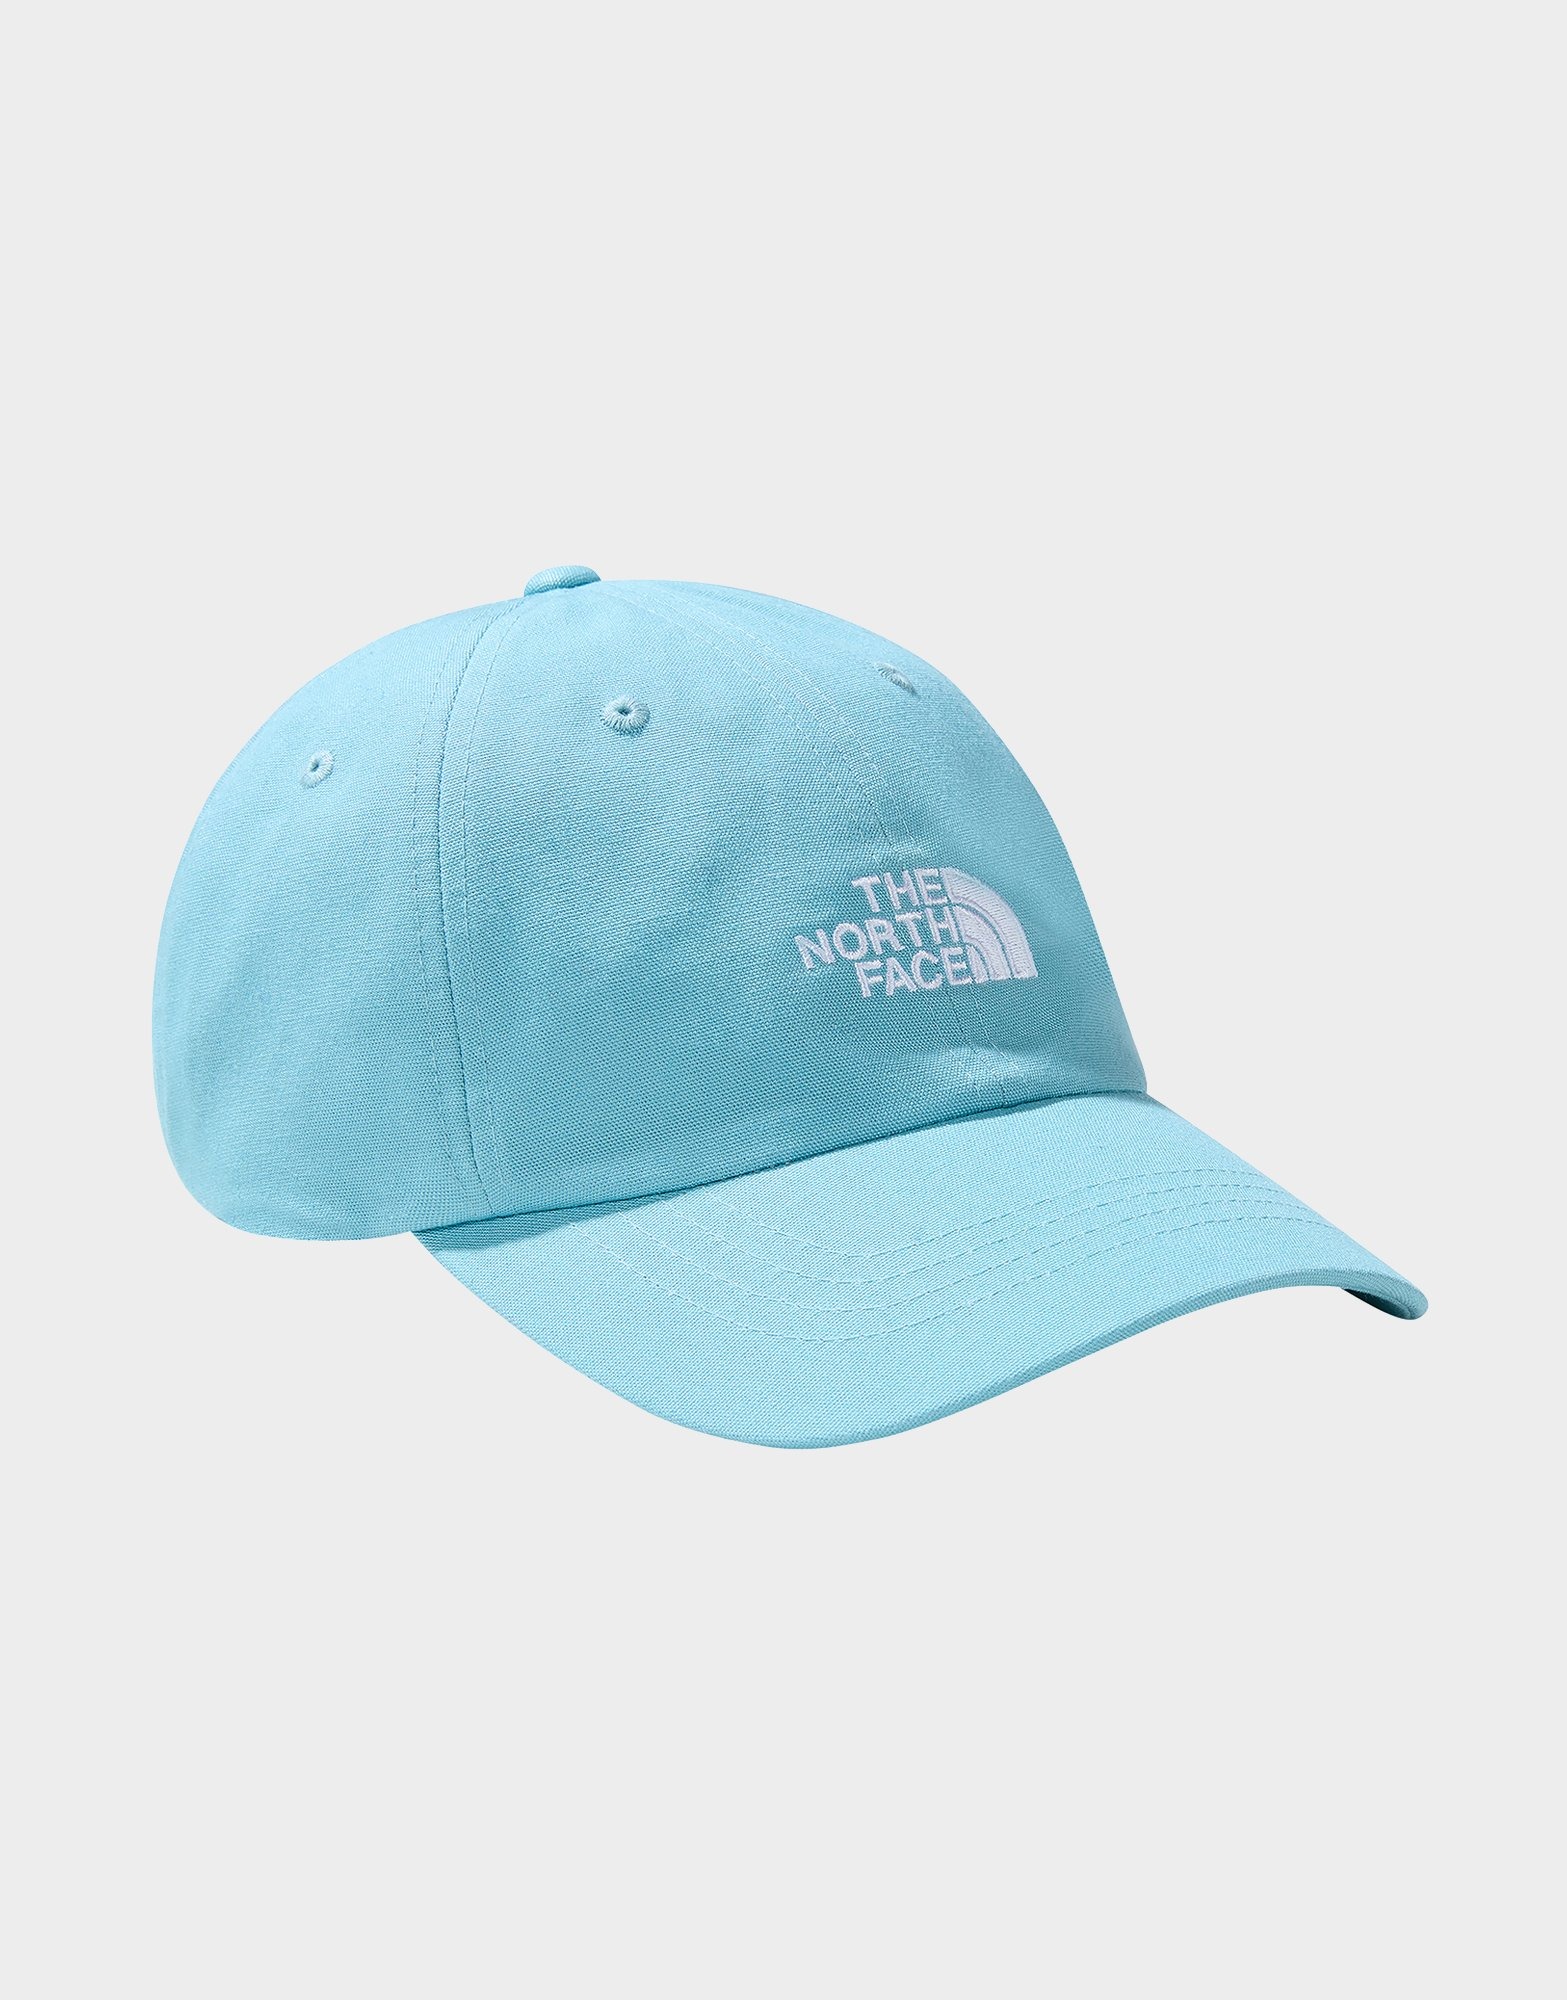 Blue The North Face Norm Cap | JD Sports UK